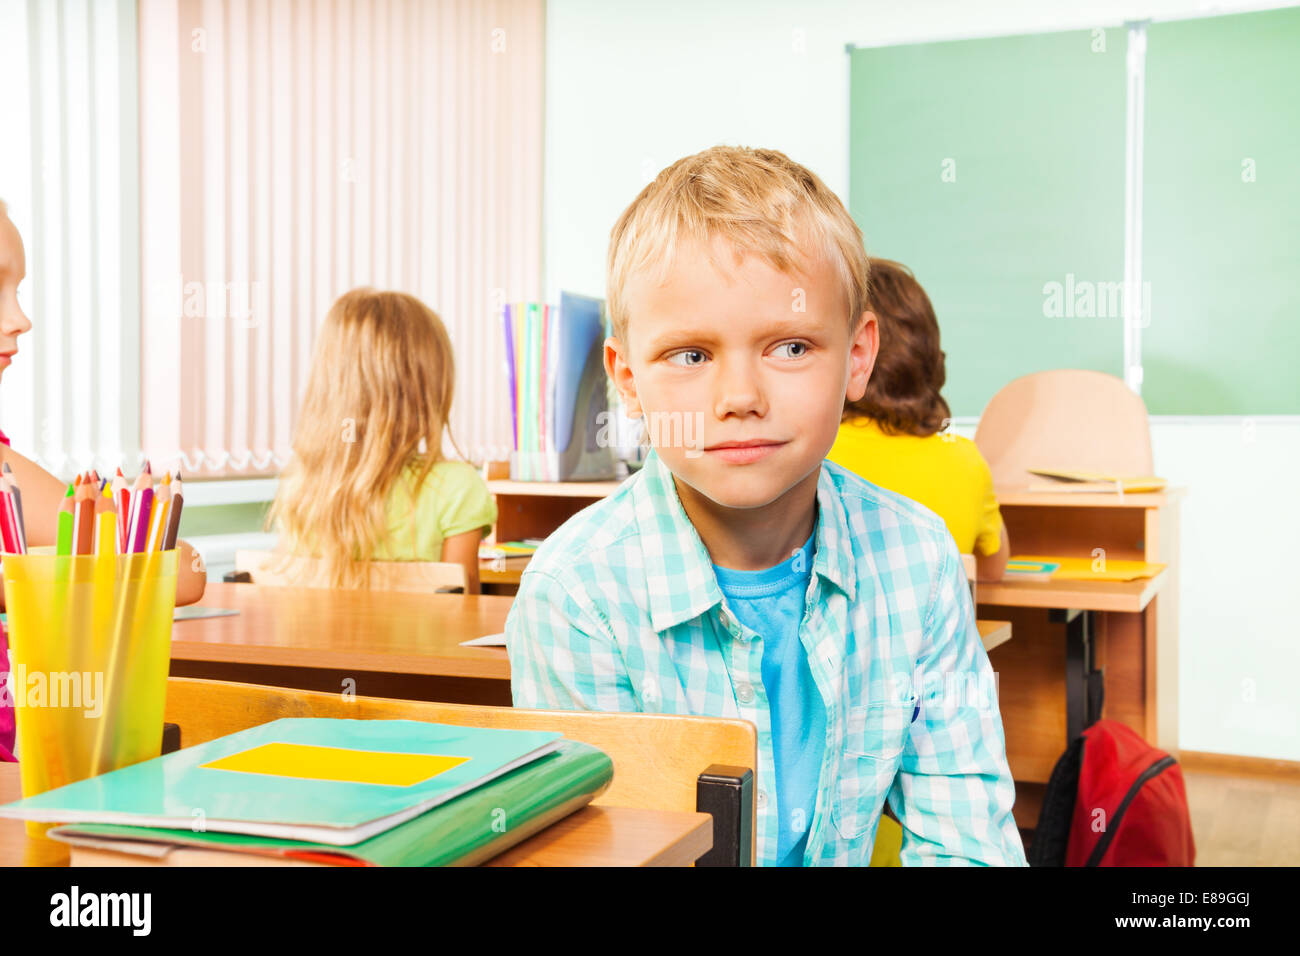 Boy sitting in school class and looking right Stock Photo